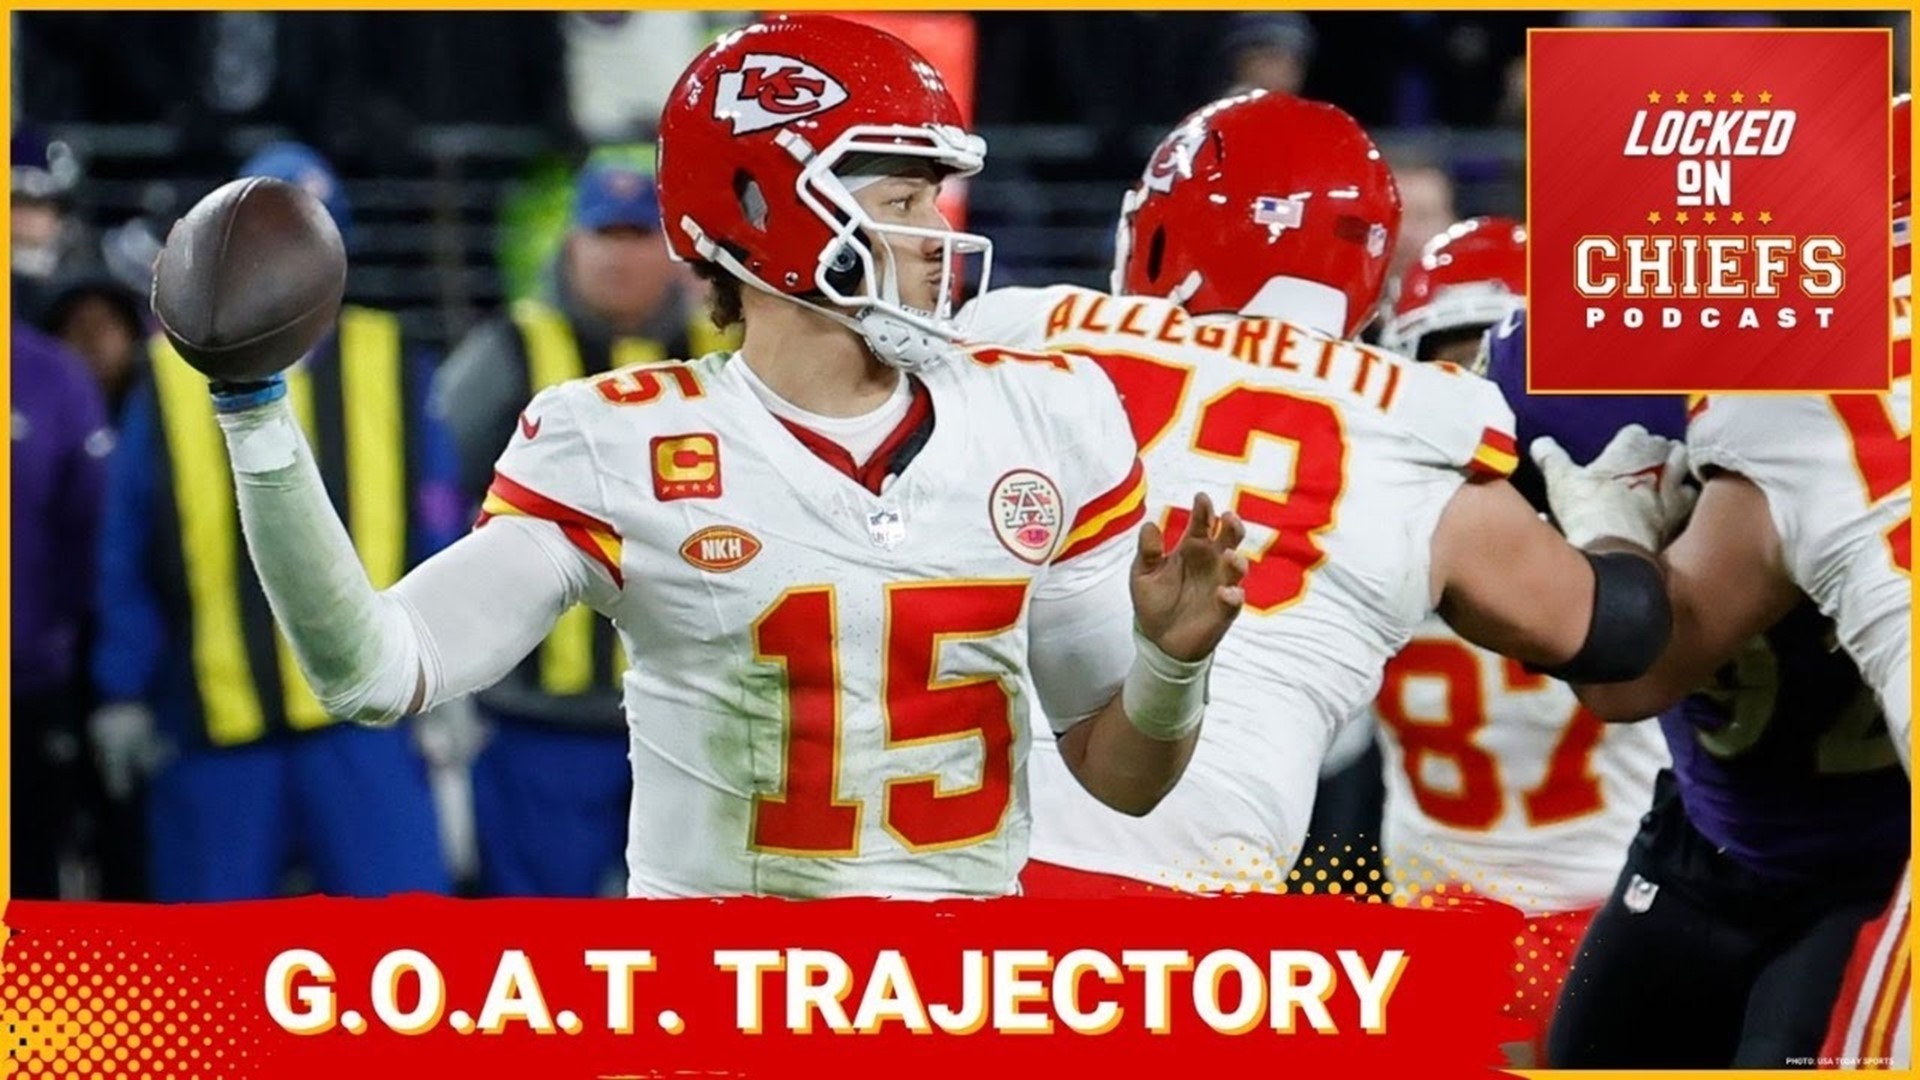 Kansas City Chiefs Patrick Mahomes has the Trajectory to replace as the G.O.A.T. Greatest of All Time!